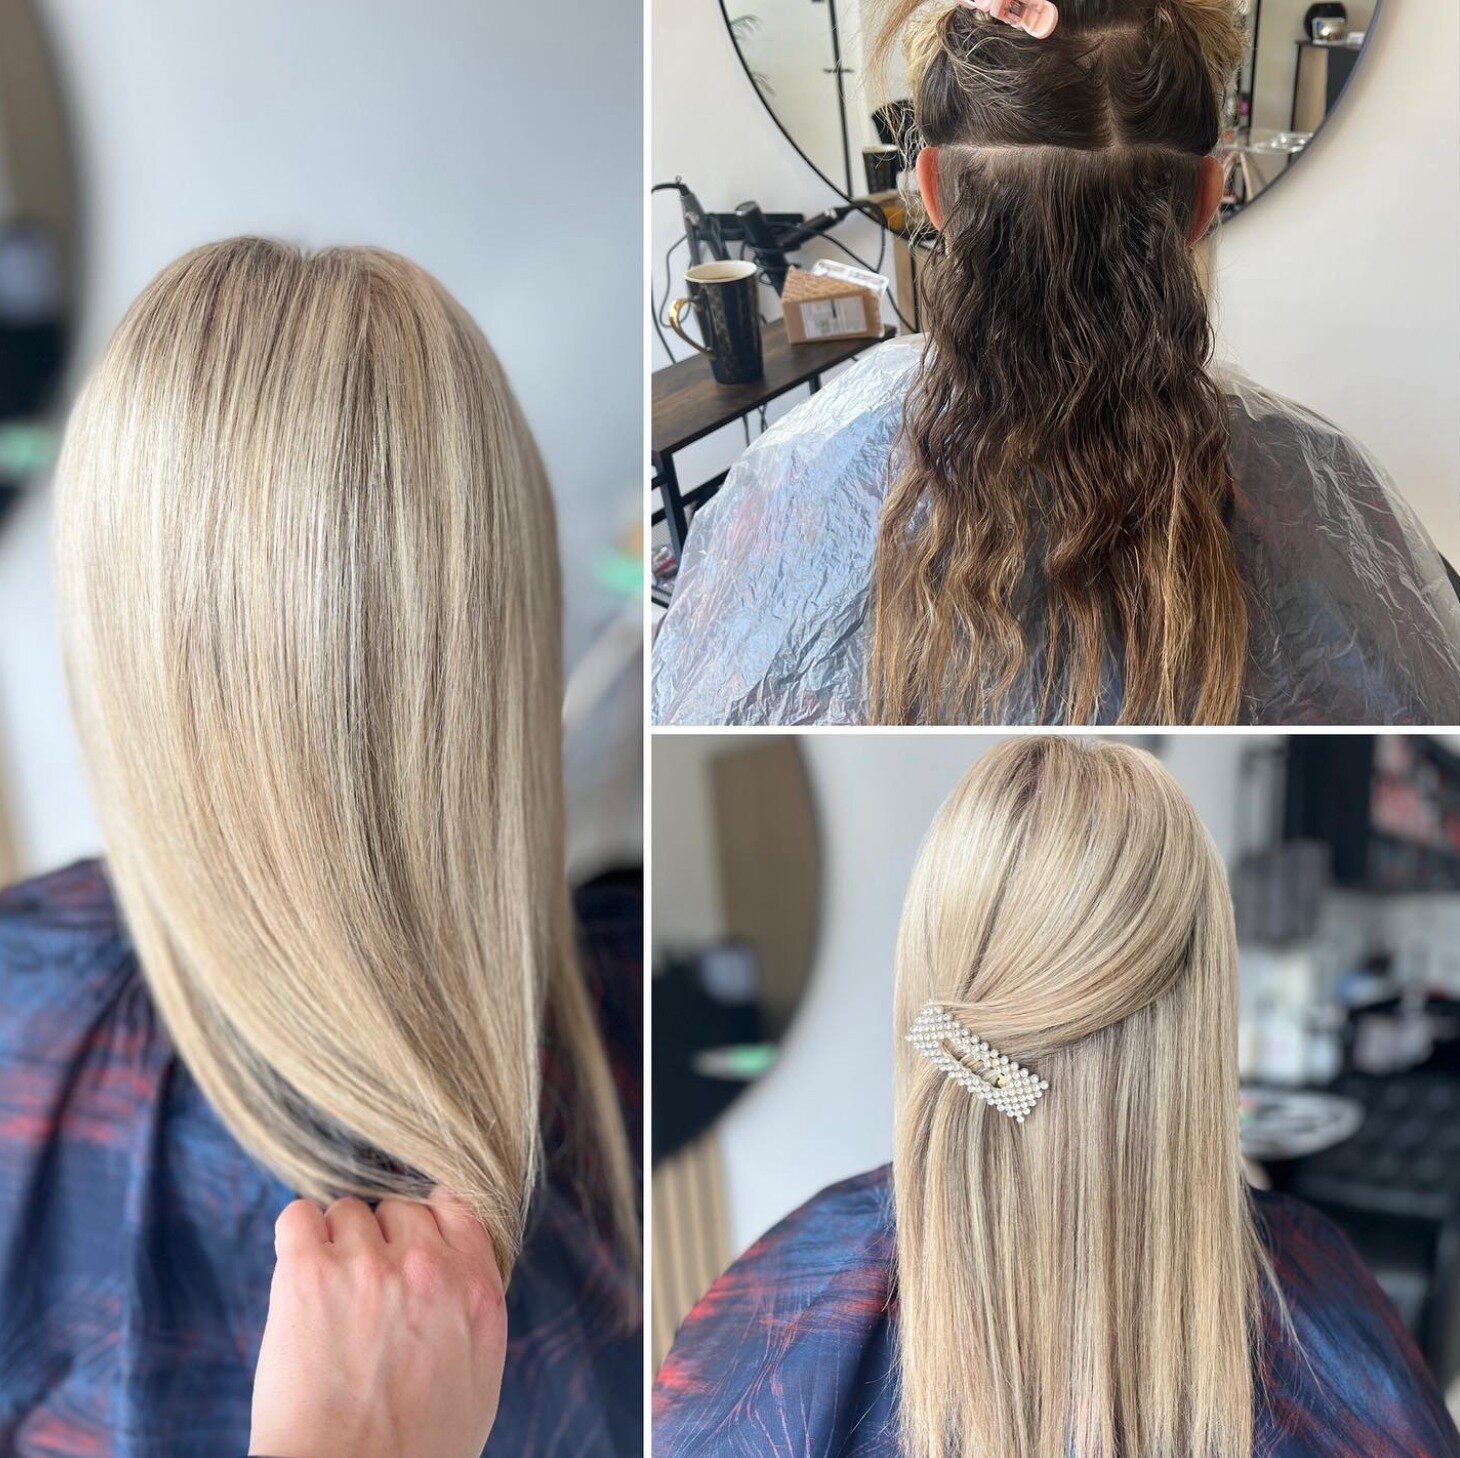 Simply wow!
We all know and probably have lots of stories about how the most gorgeous blonde never materialised.
But not with Justyna! You are in expert hands with her

@hair_embassyofglam 

#hairlondon #londonsalon #hairtransformation